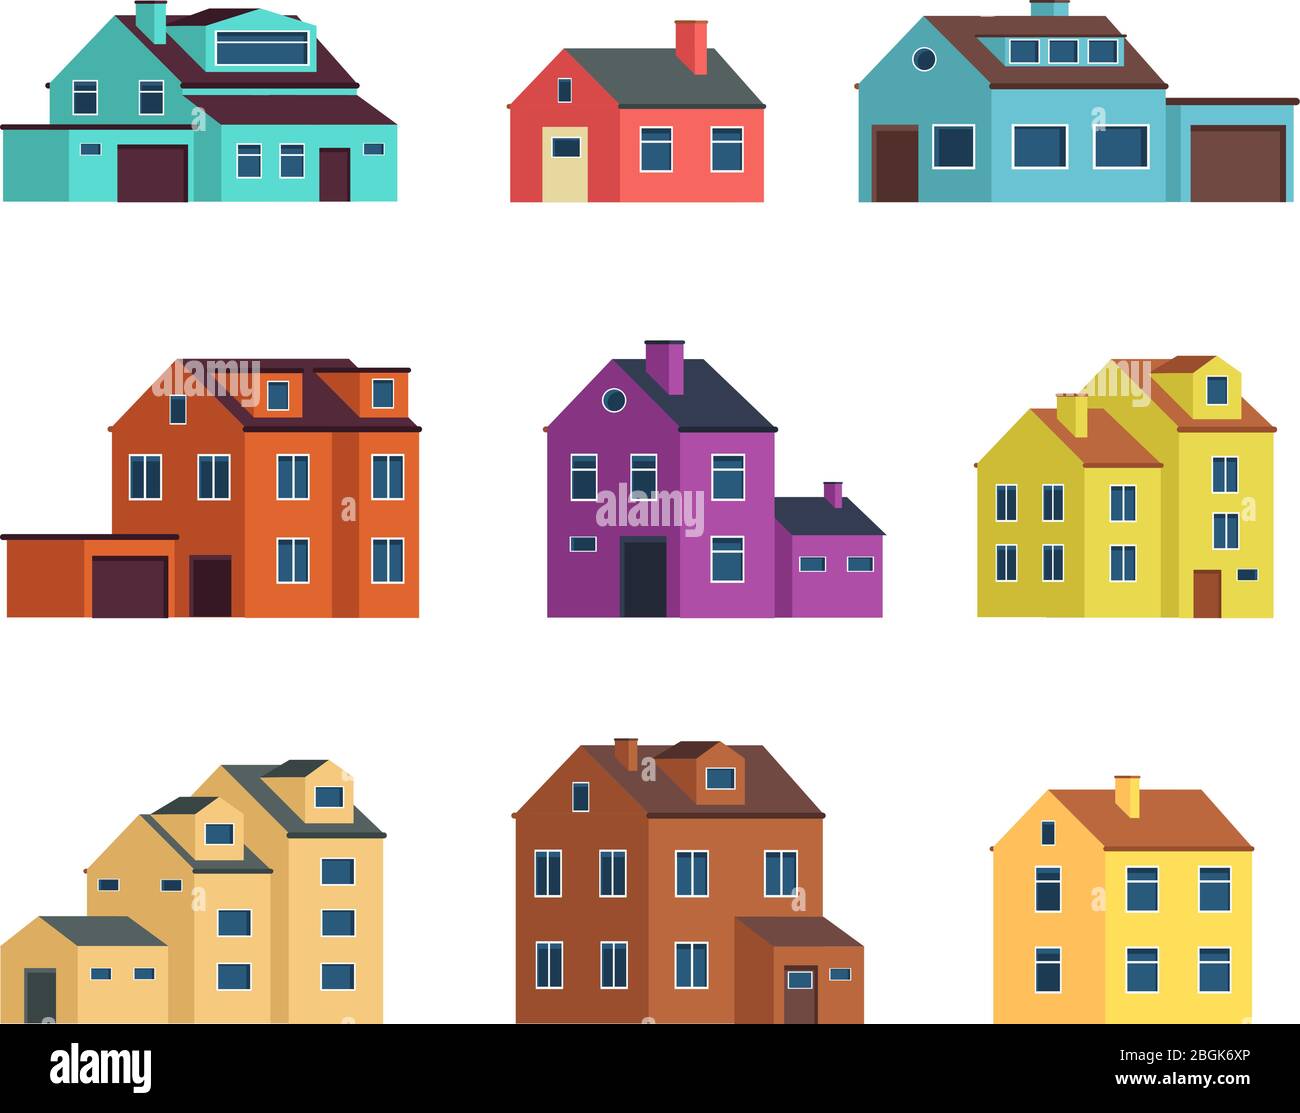 Flat cartoon town houses, cottage buildings with door and windows. Home exterior vector set isolated. House building exterior, town cottage architecture illustration Stock Vector